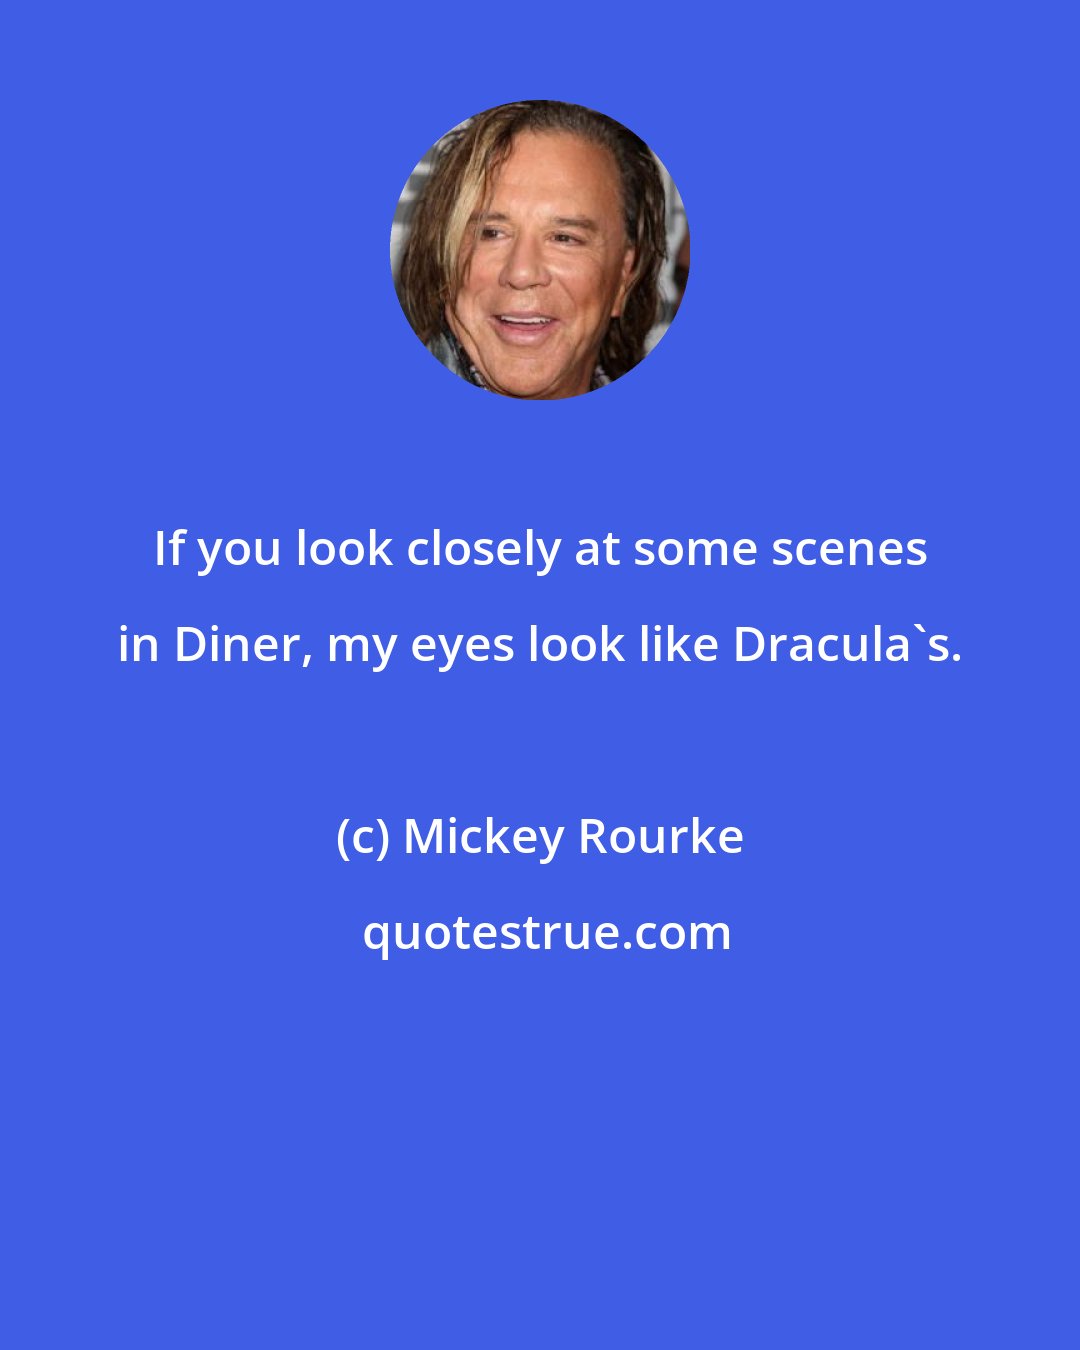 Mickey Rourke: If you look closely at some scenes in Diner, my eyes look like Dracula's.